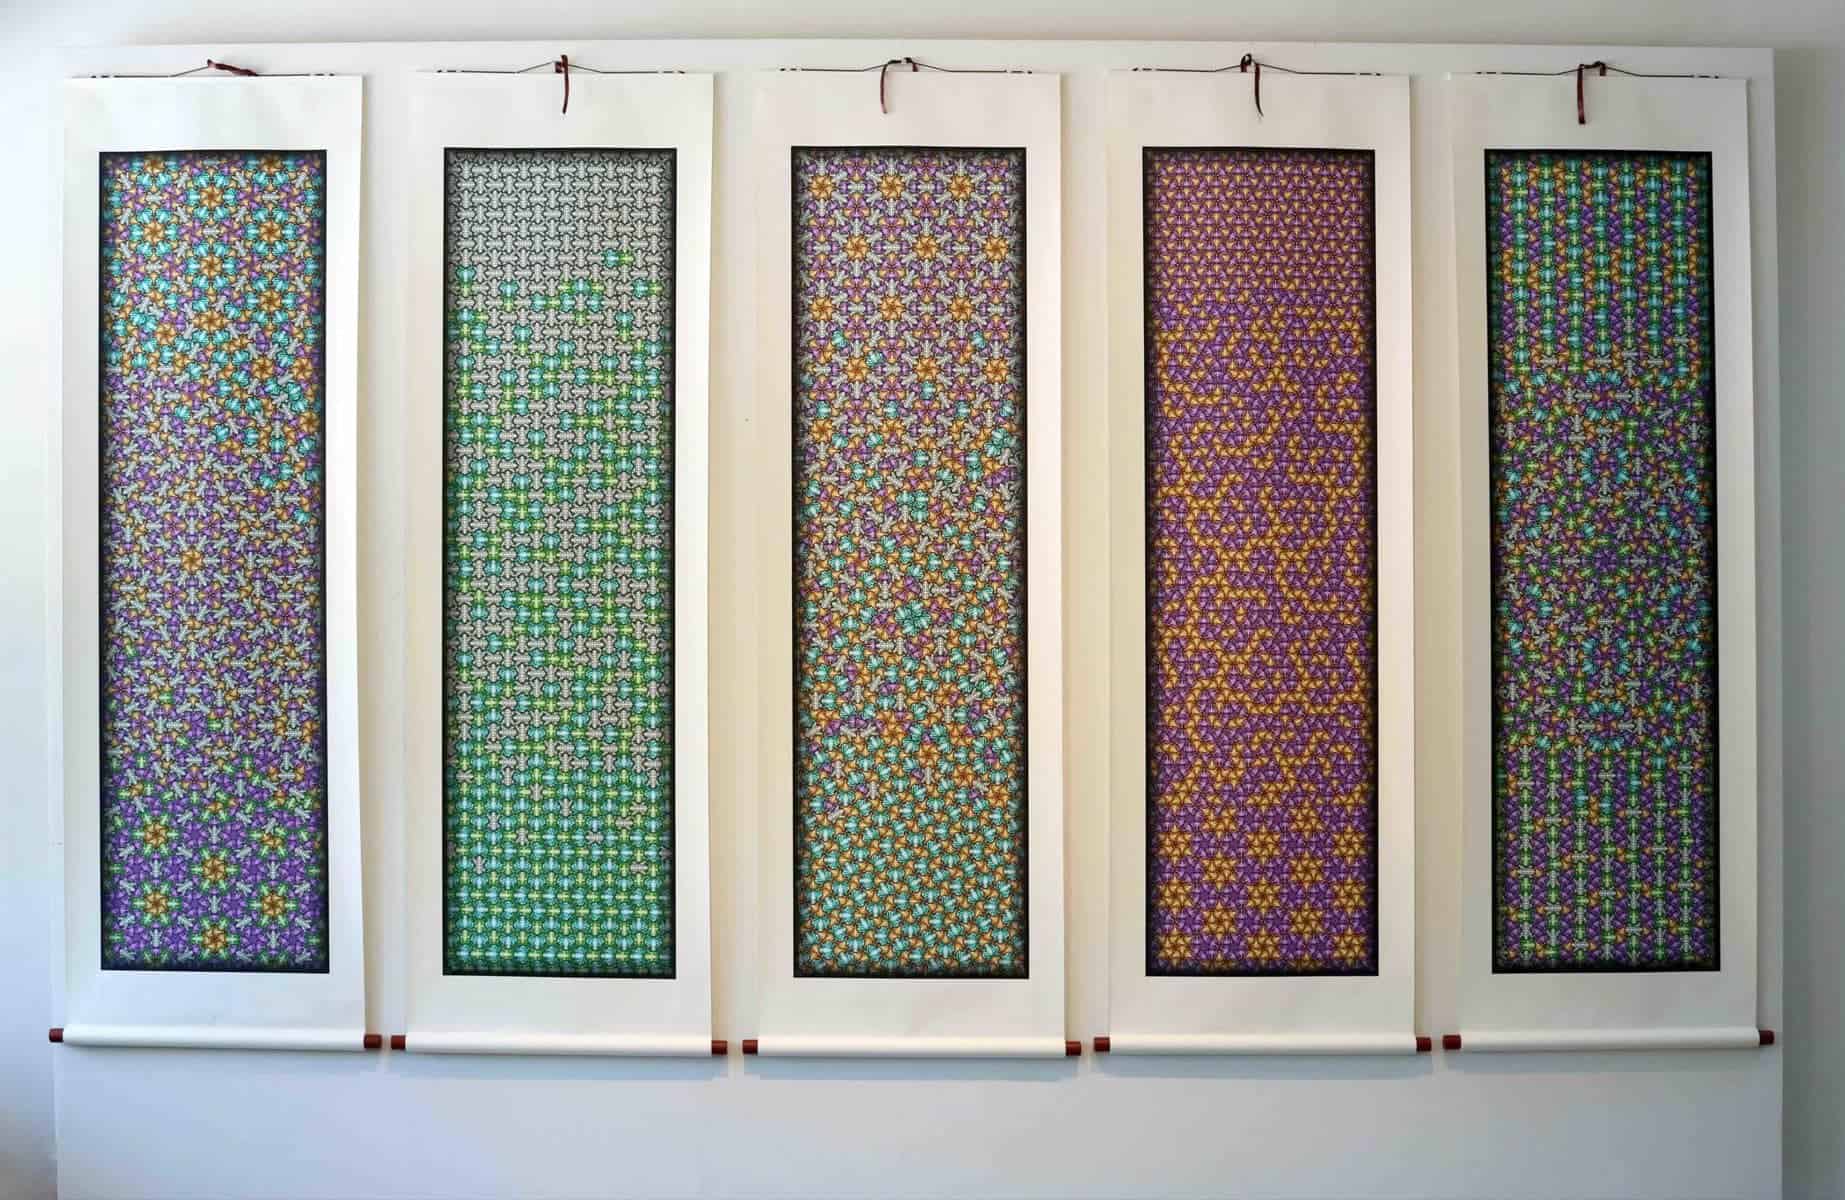 Hassell's Archimedes Aquatics collection of scrolls, which were developed between 2018 and 2020. 